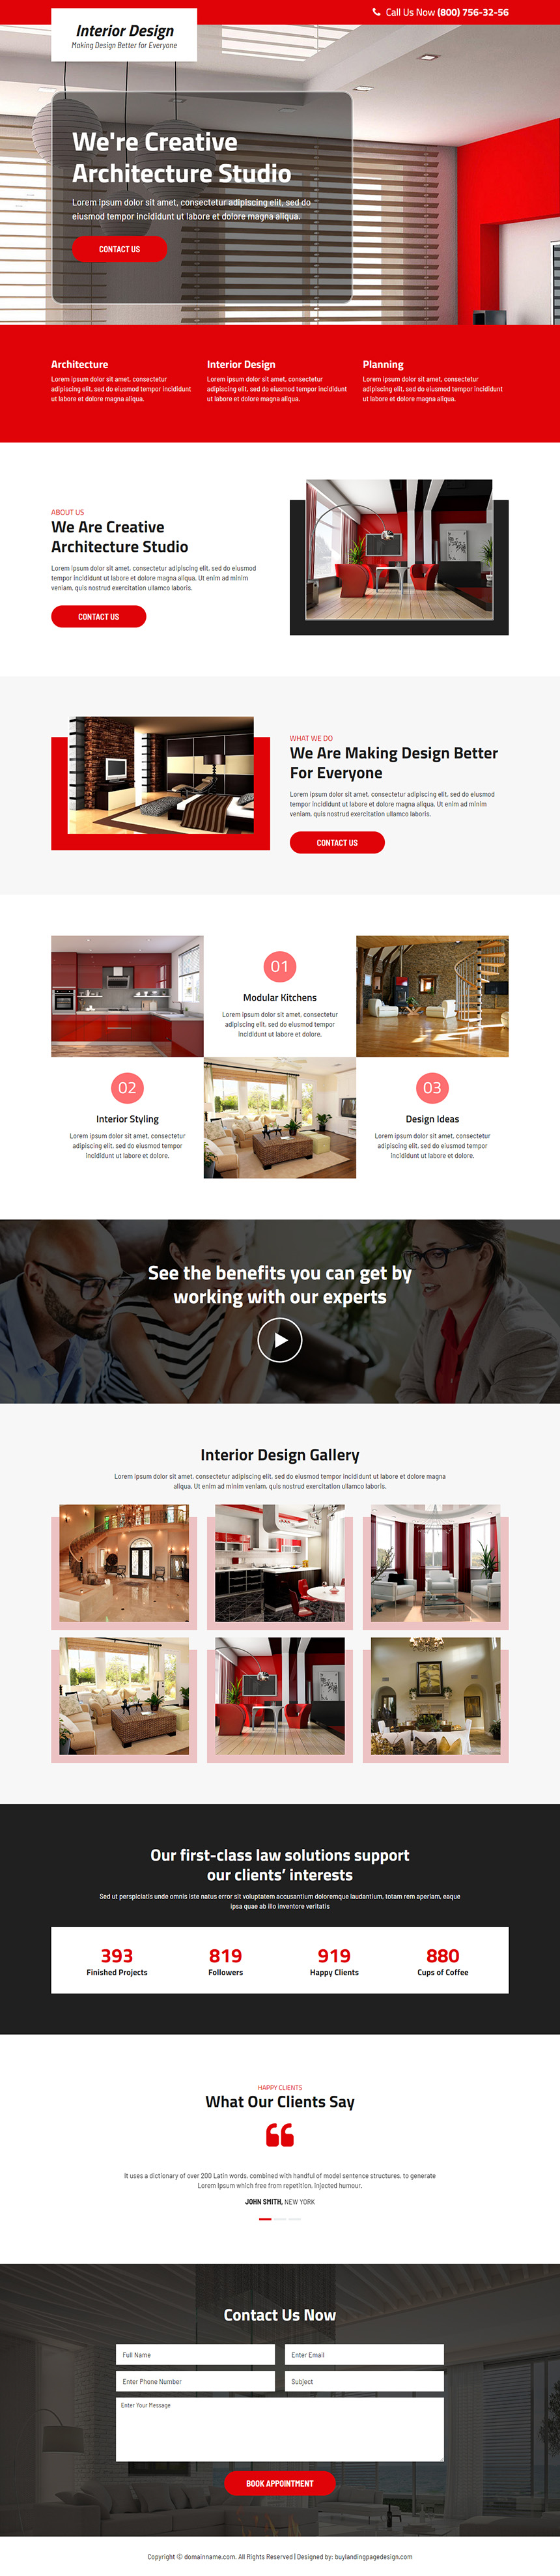 interior design solutions free online consultation landing page